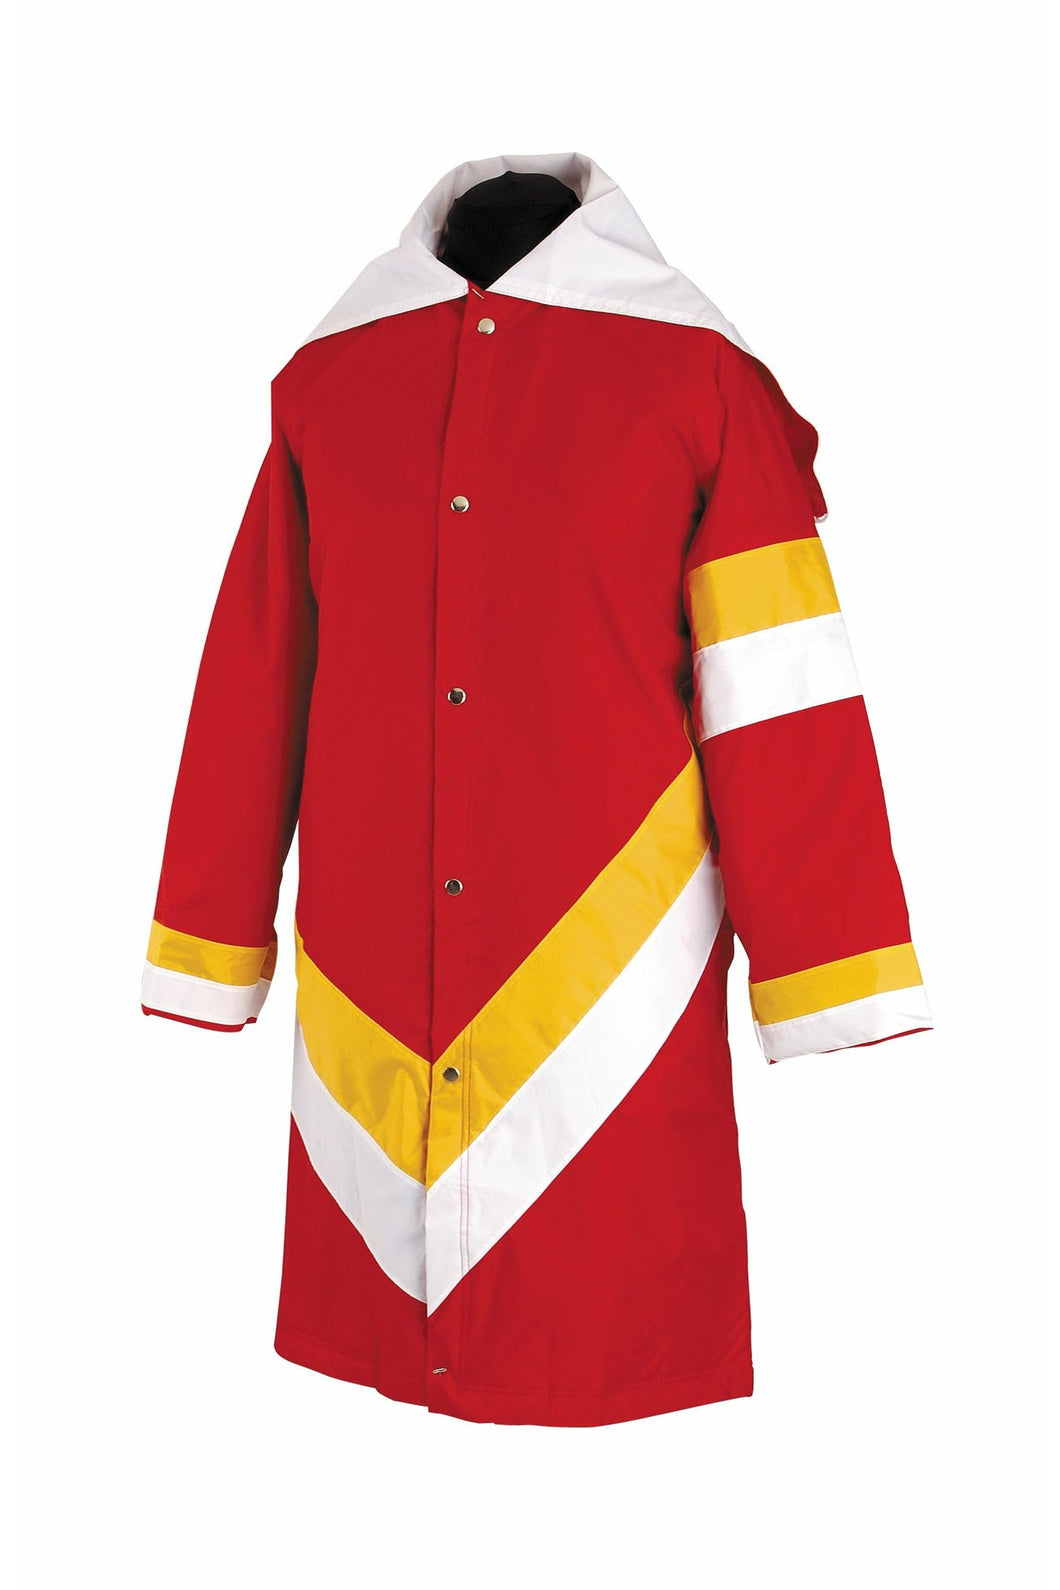 Deluxe Performer Raincoat A Styleplusband